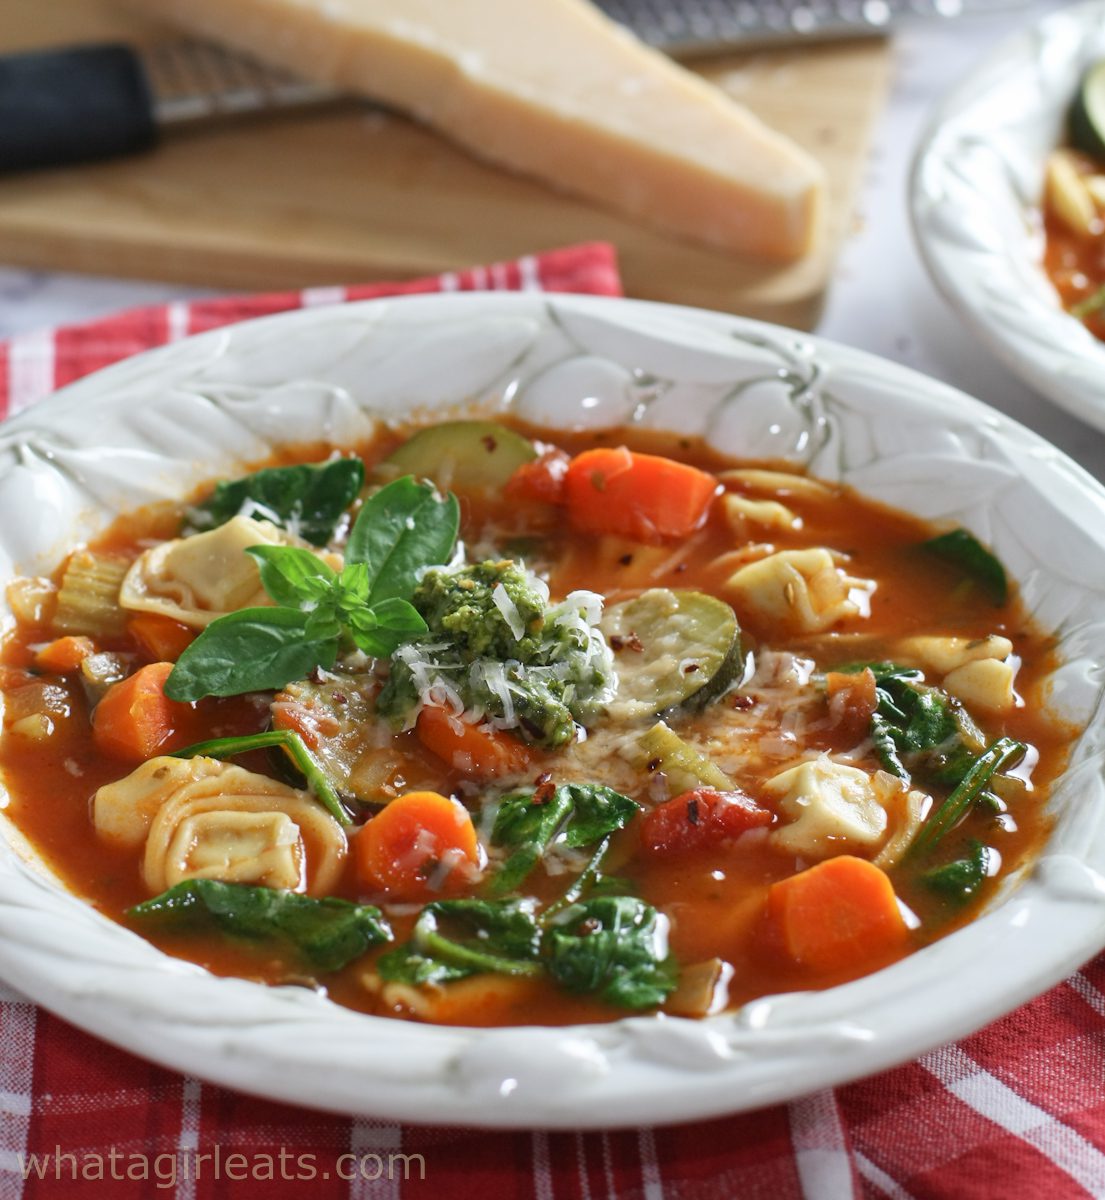 Tortellini Soup with vegetables.